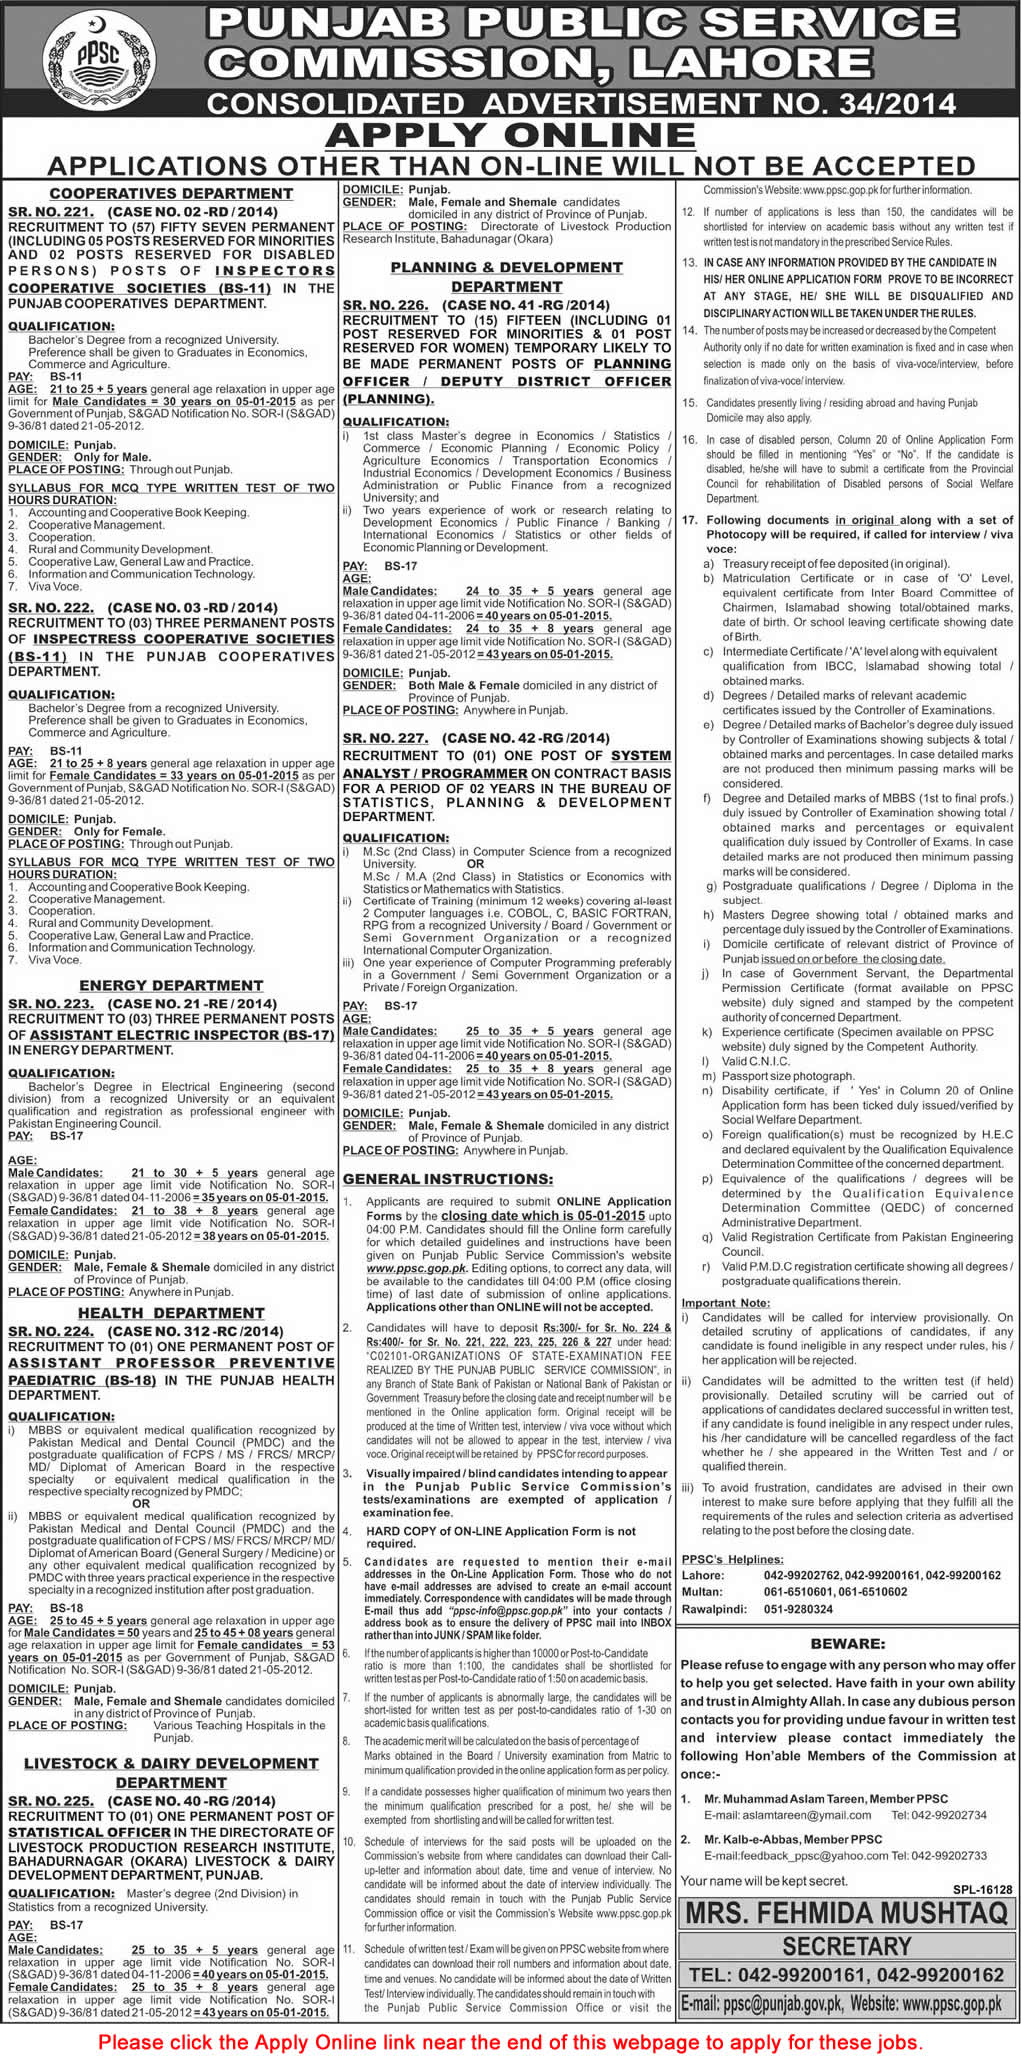 PPSC Jobs December 2014 Apply Online Consolidated Advertisement 34/2014